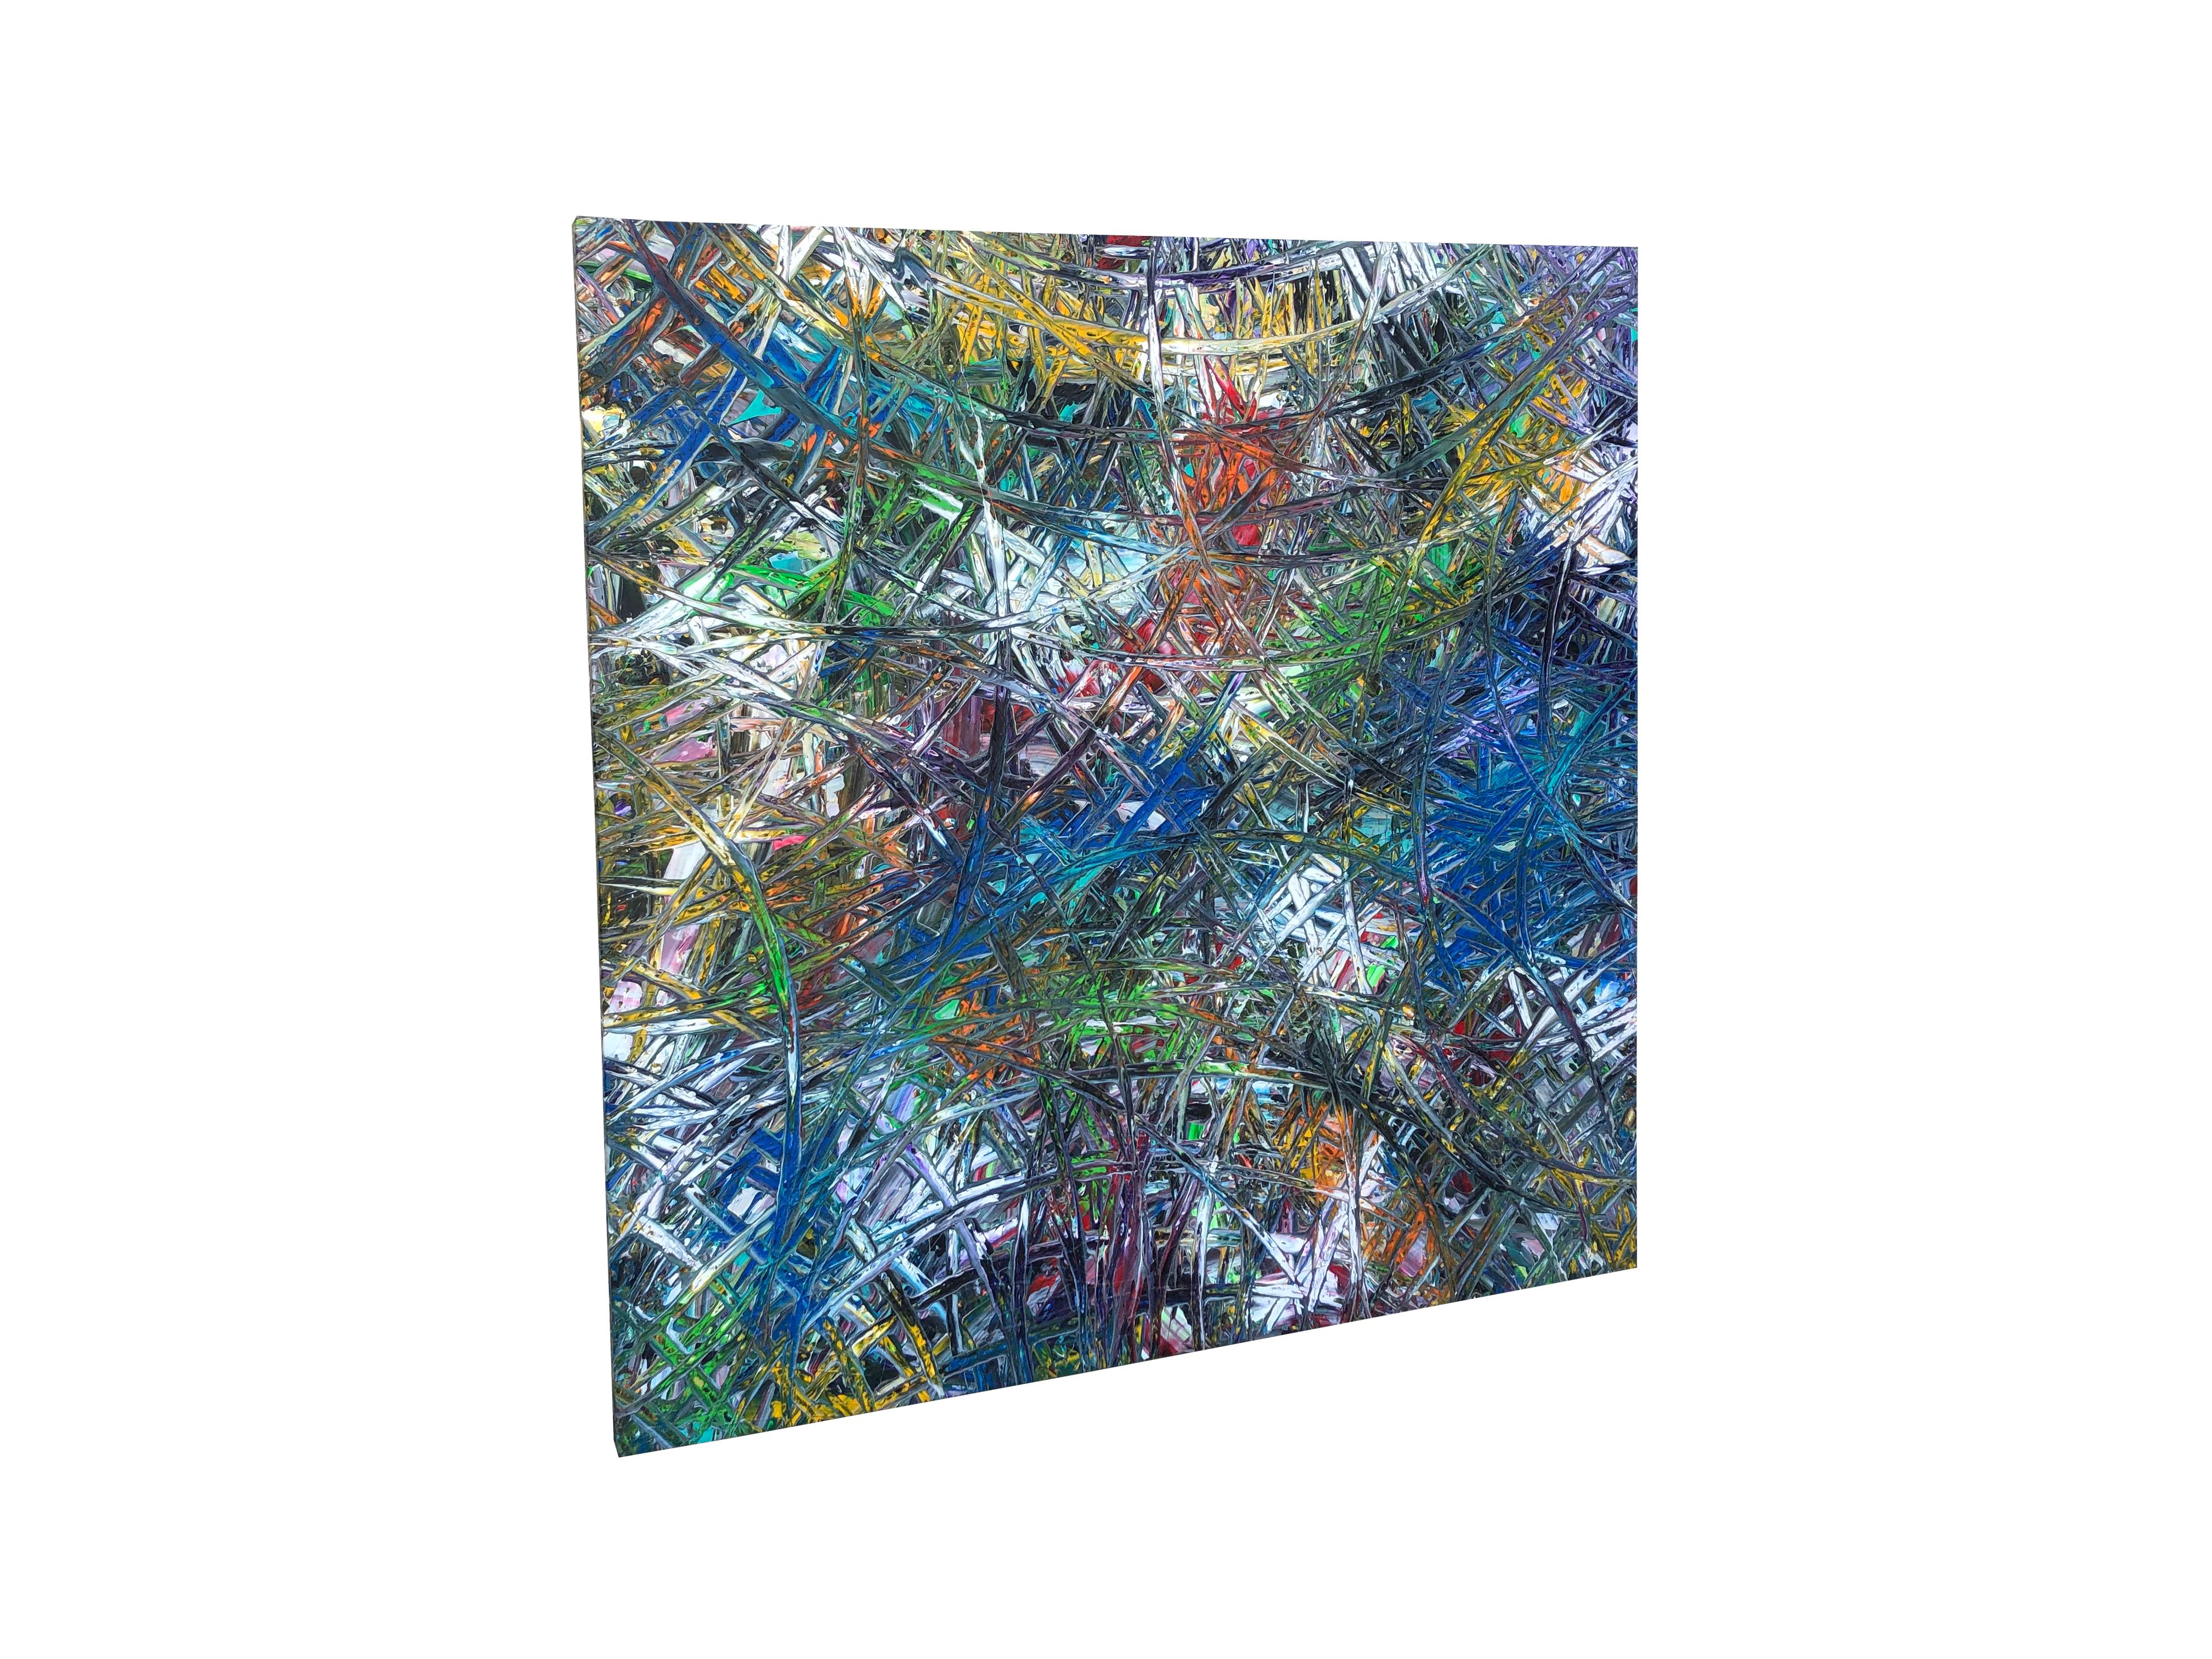 Stained glass is the name of this large abstract acrylic painting. The painting gets its name from the crisscrossing pattern of multicoloured paint. Like the great cathedrals of Europe whose churches have supersized windows filled with coloured